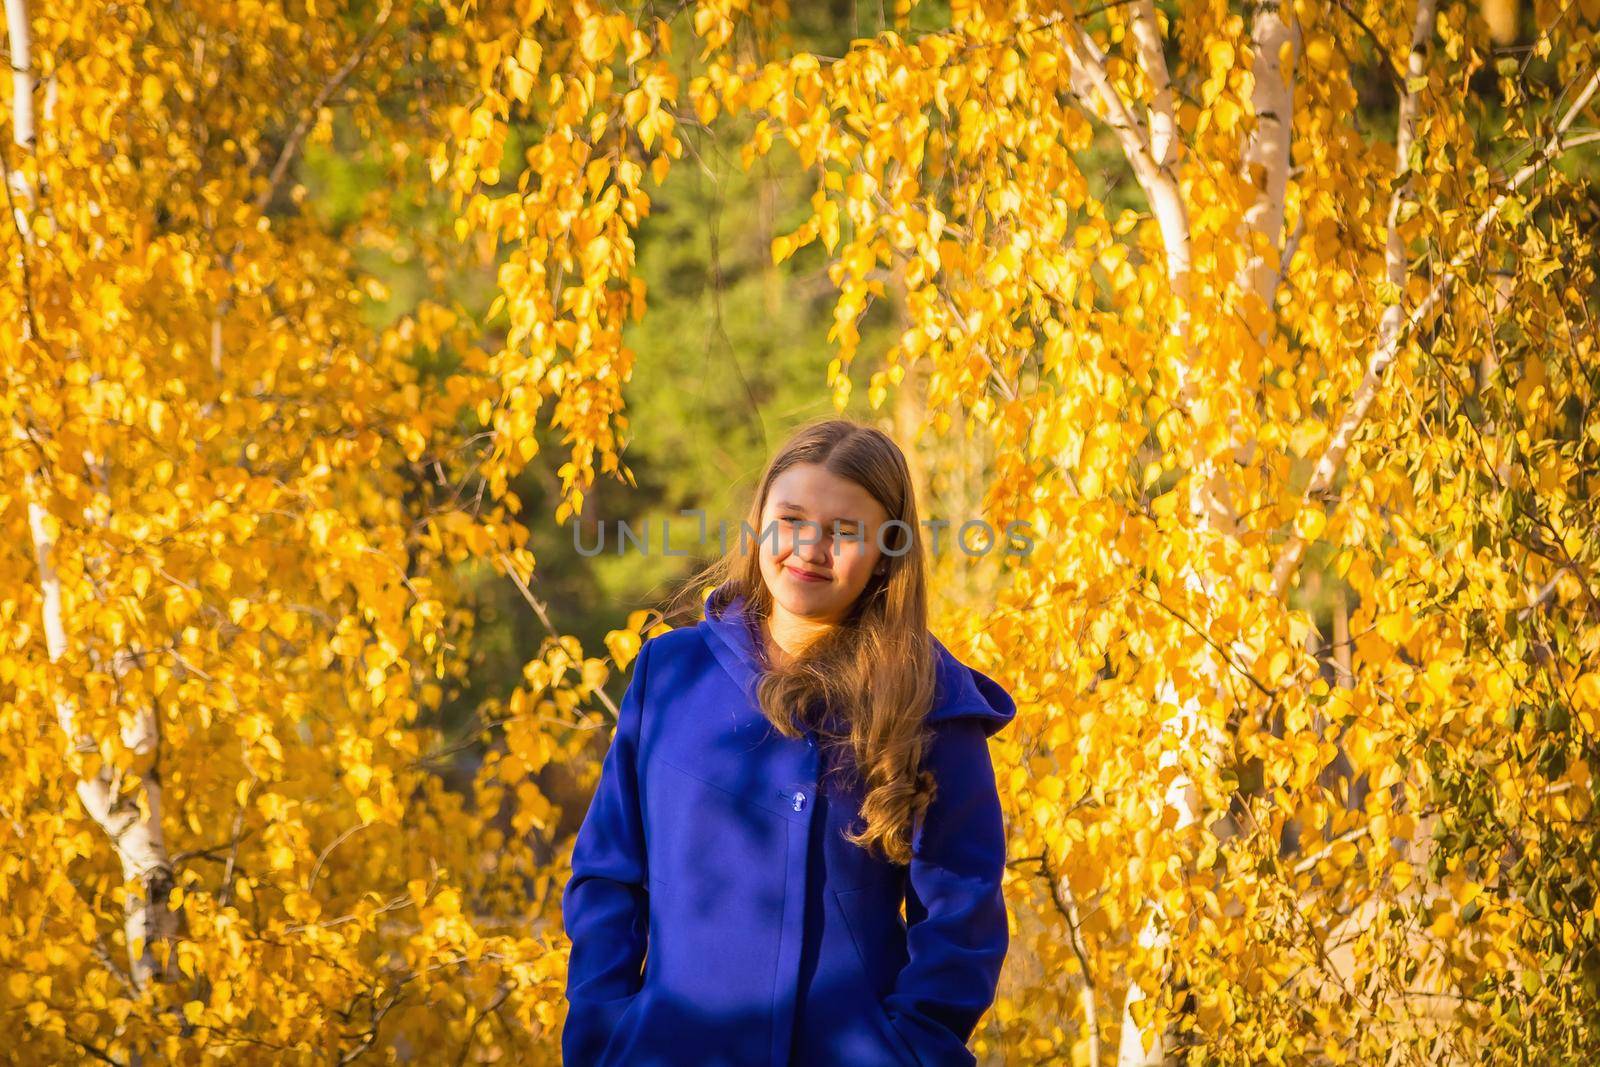 A young girl walks in the autumn park, stands behind a tree. The trees have yellow leaves.